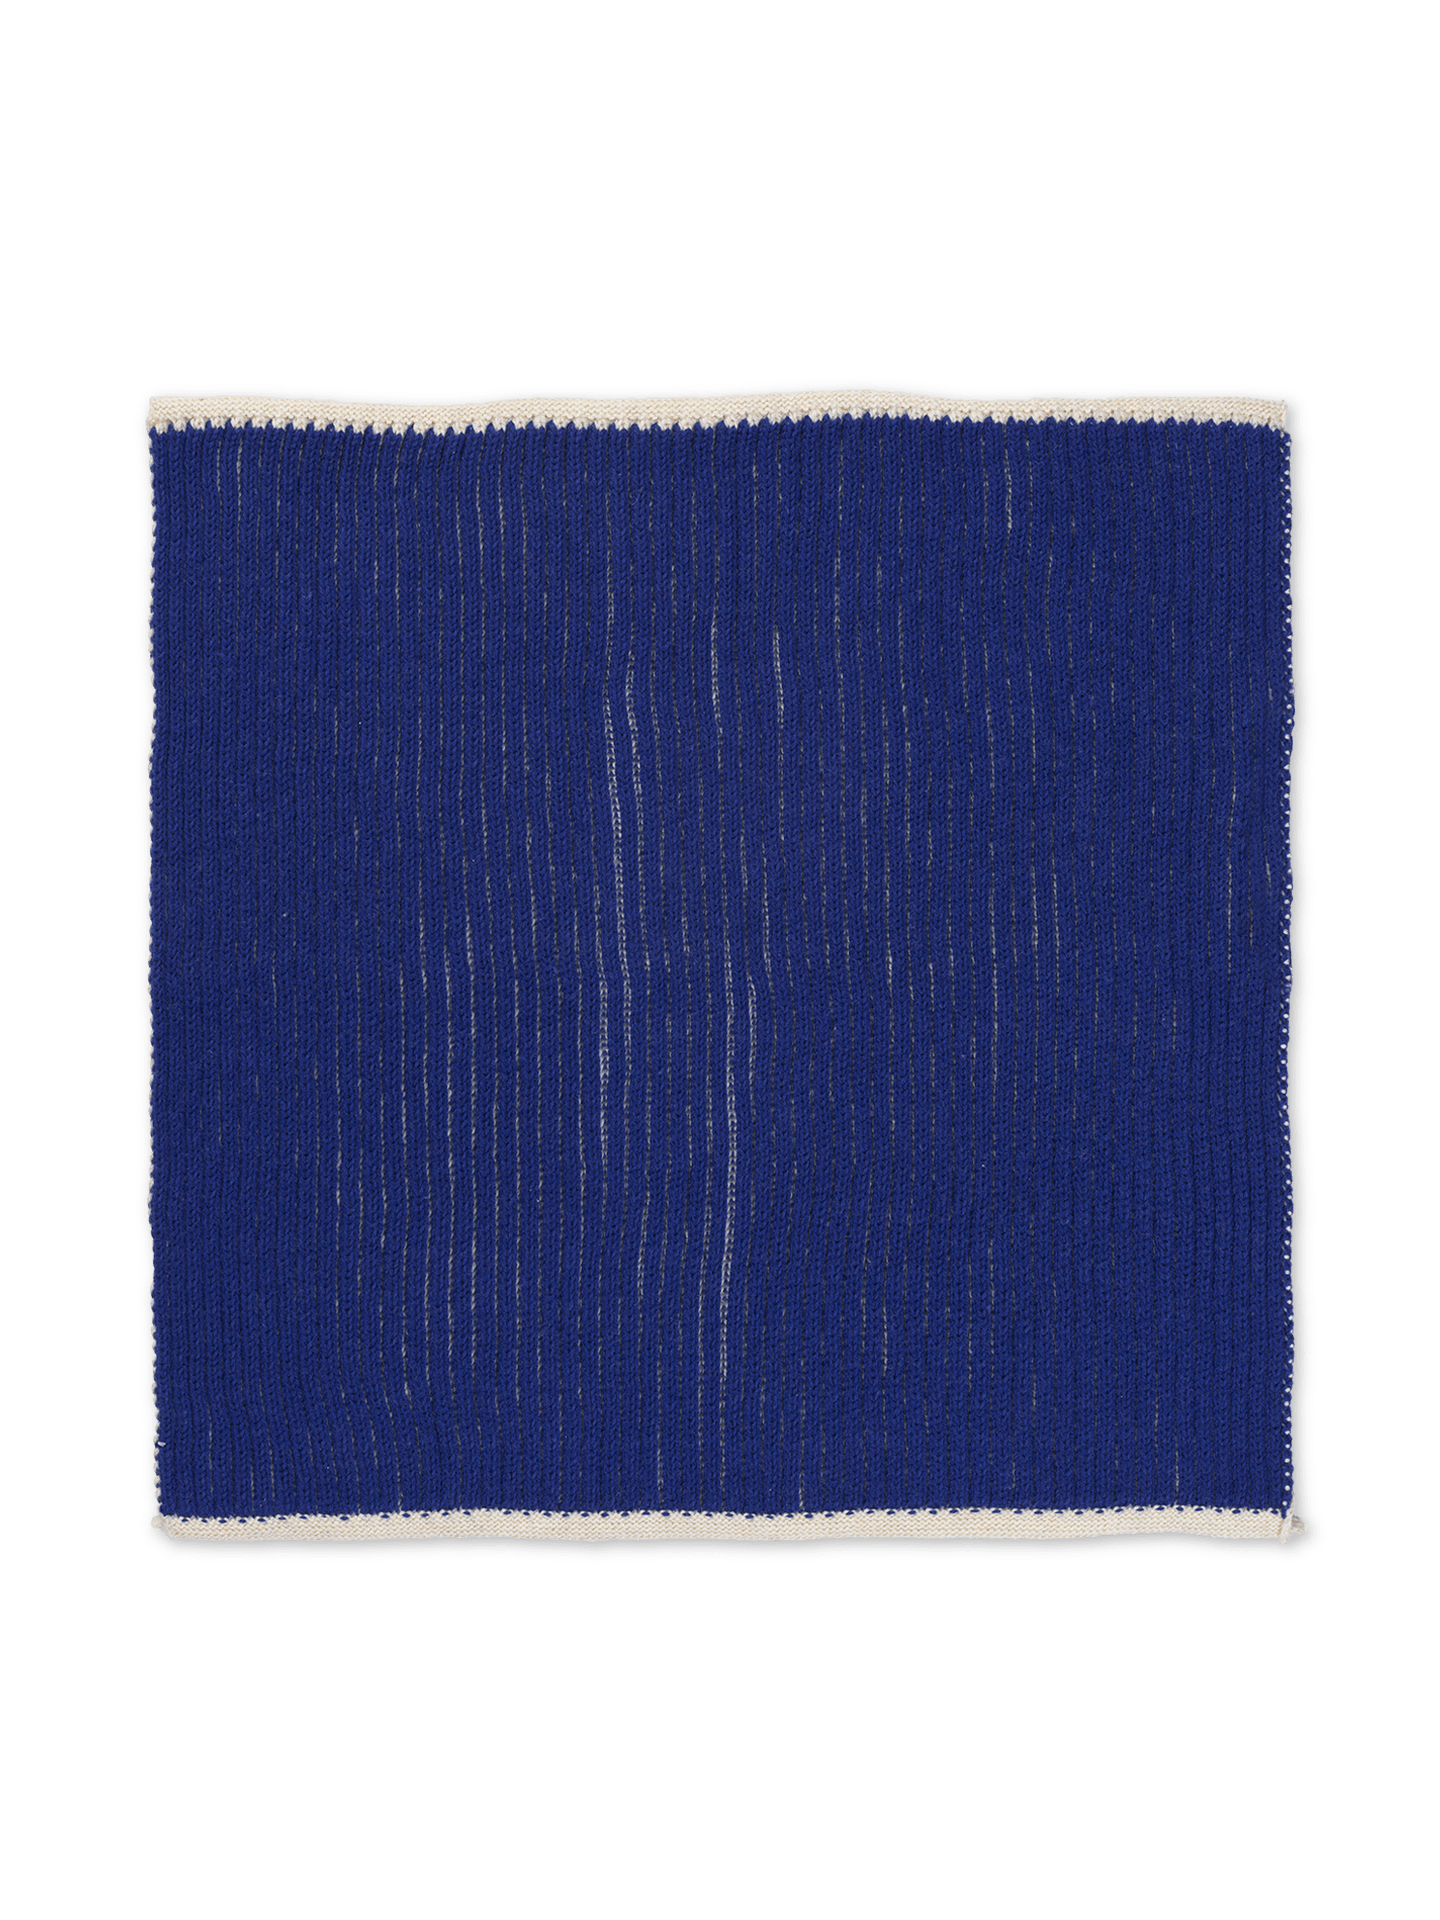 Twofold Knit Cloth (Set of 2) - Bright Blue/Off White